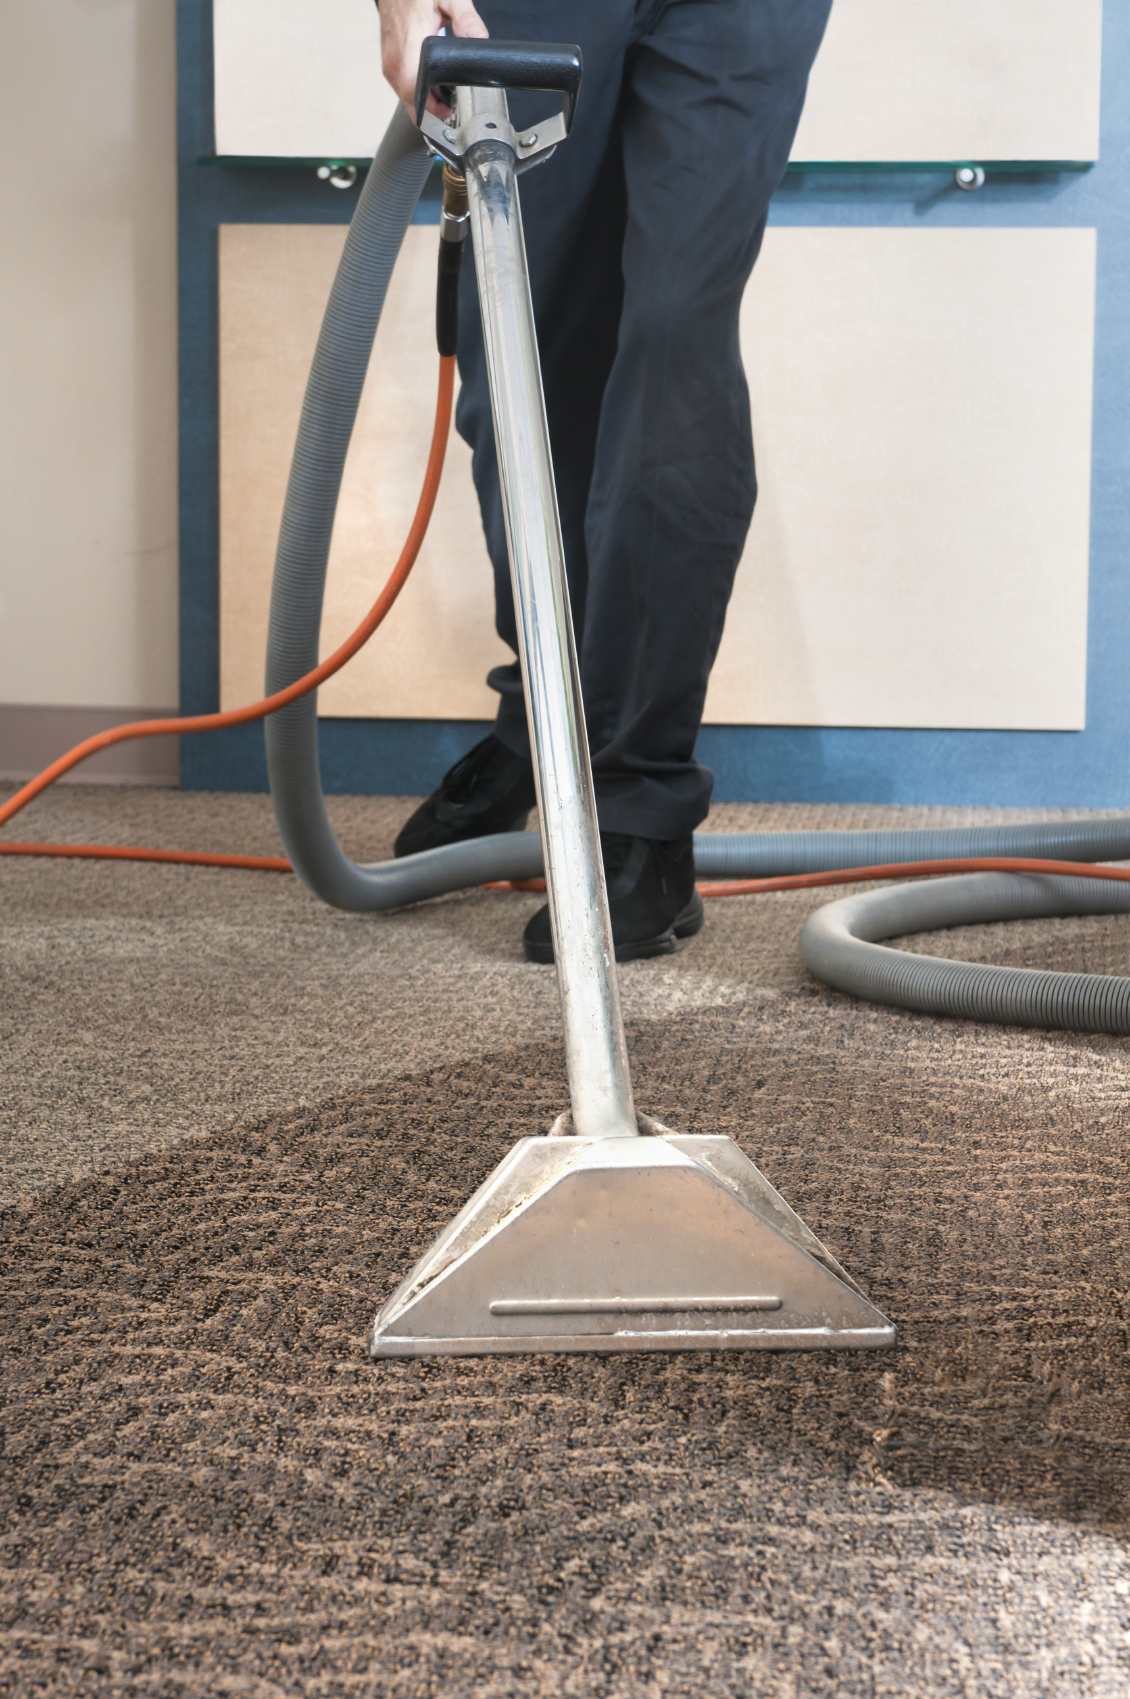 The Reason Why You Should Hire A Carpet Cleaning Company In Austin Texas?